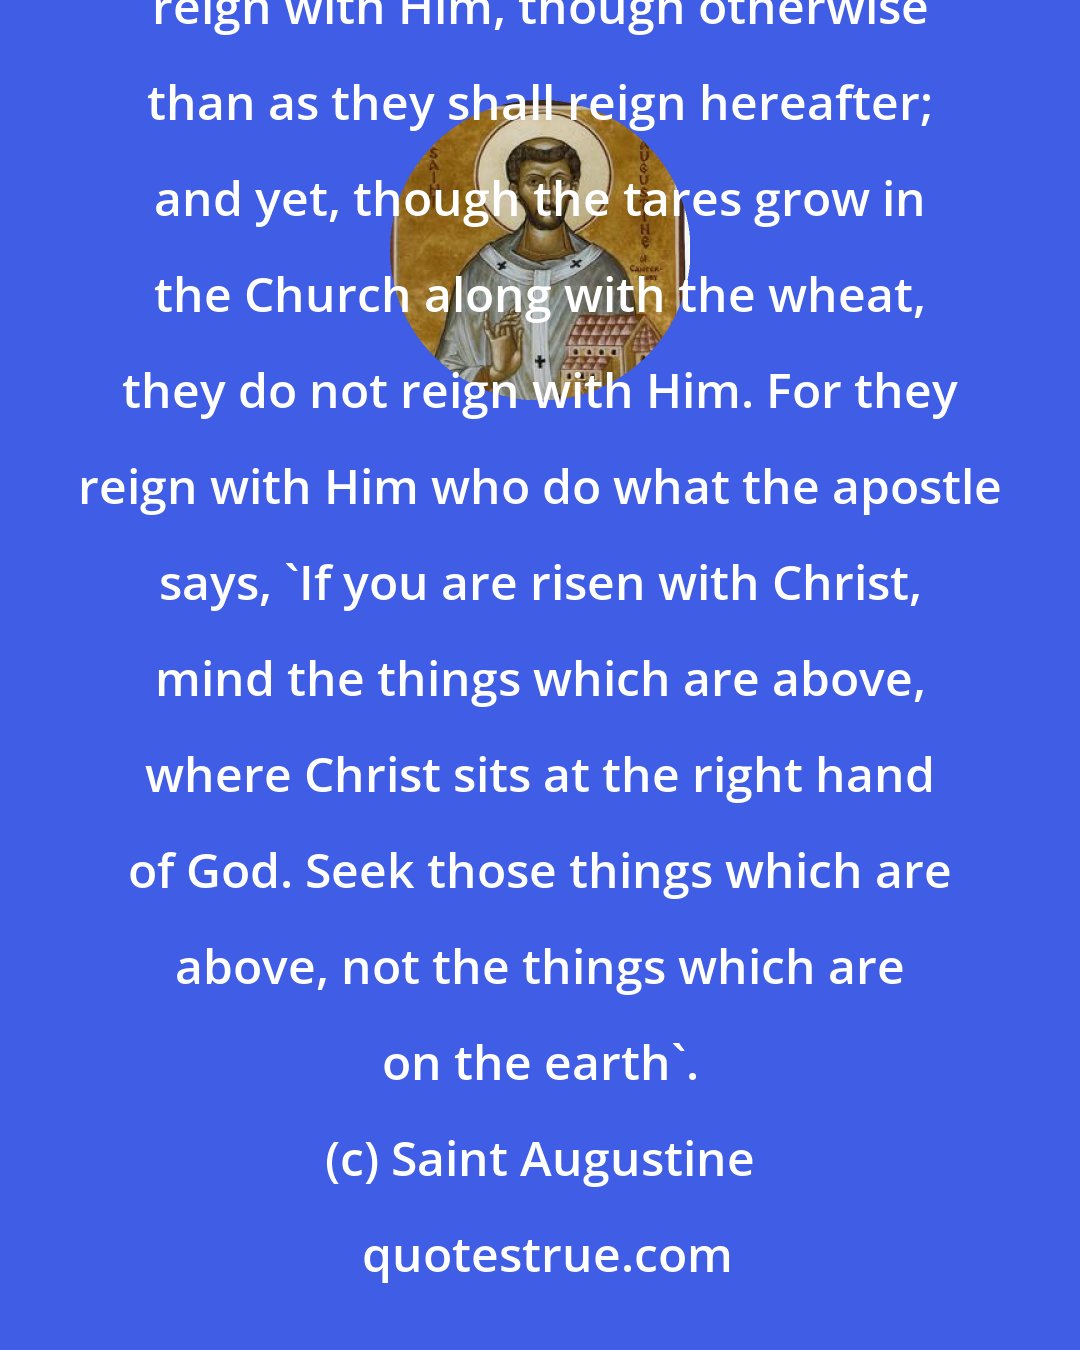 Saint Augustine: The Church even now is the kingdom of Christ and the kingdom of heaven. Accordingly, even now His saints reign with Him, though otherwise than as they shall reign hereafter; and yet, though the tares grow in the Church along with the wheat, they do not reign with Him. For they reign with Him who do what the apostle says, 'If you are risen with Christ, mind the things which are above, where Christ sits at the right hand of God. Seek those things which are above, not the things which are on the earth'.